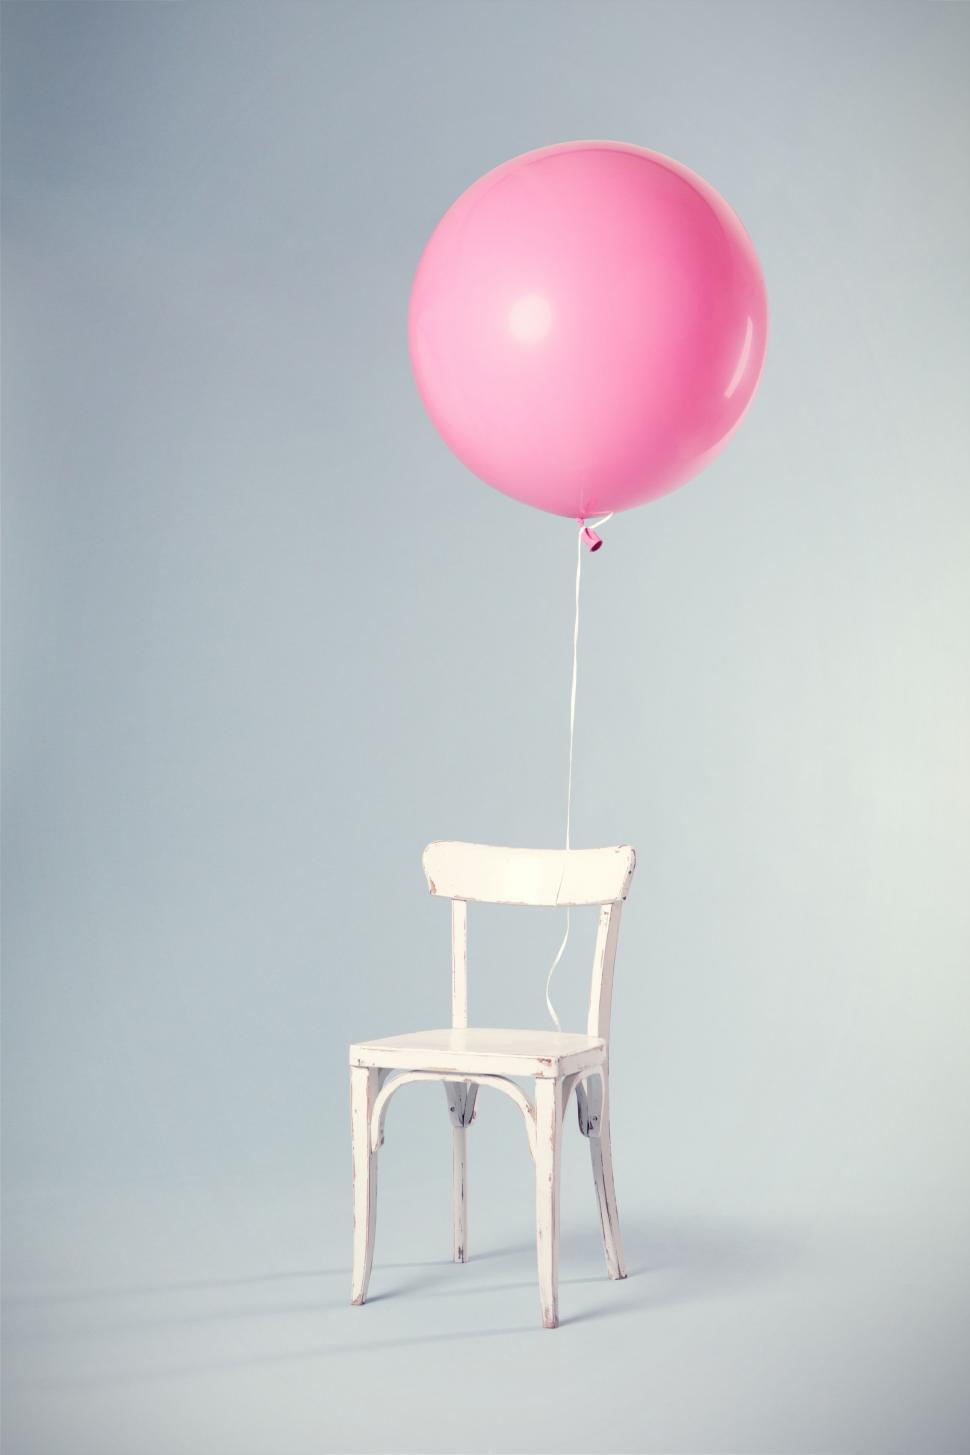 Free Image of White Chair With Pink Balloon 